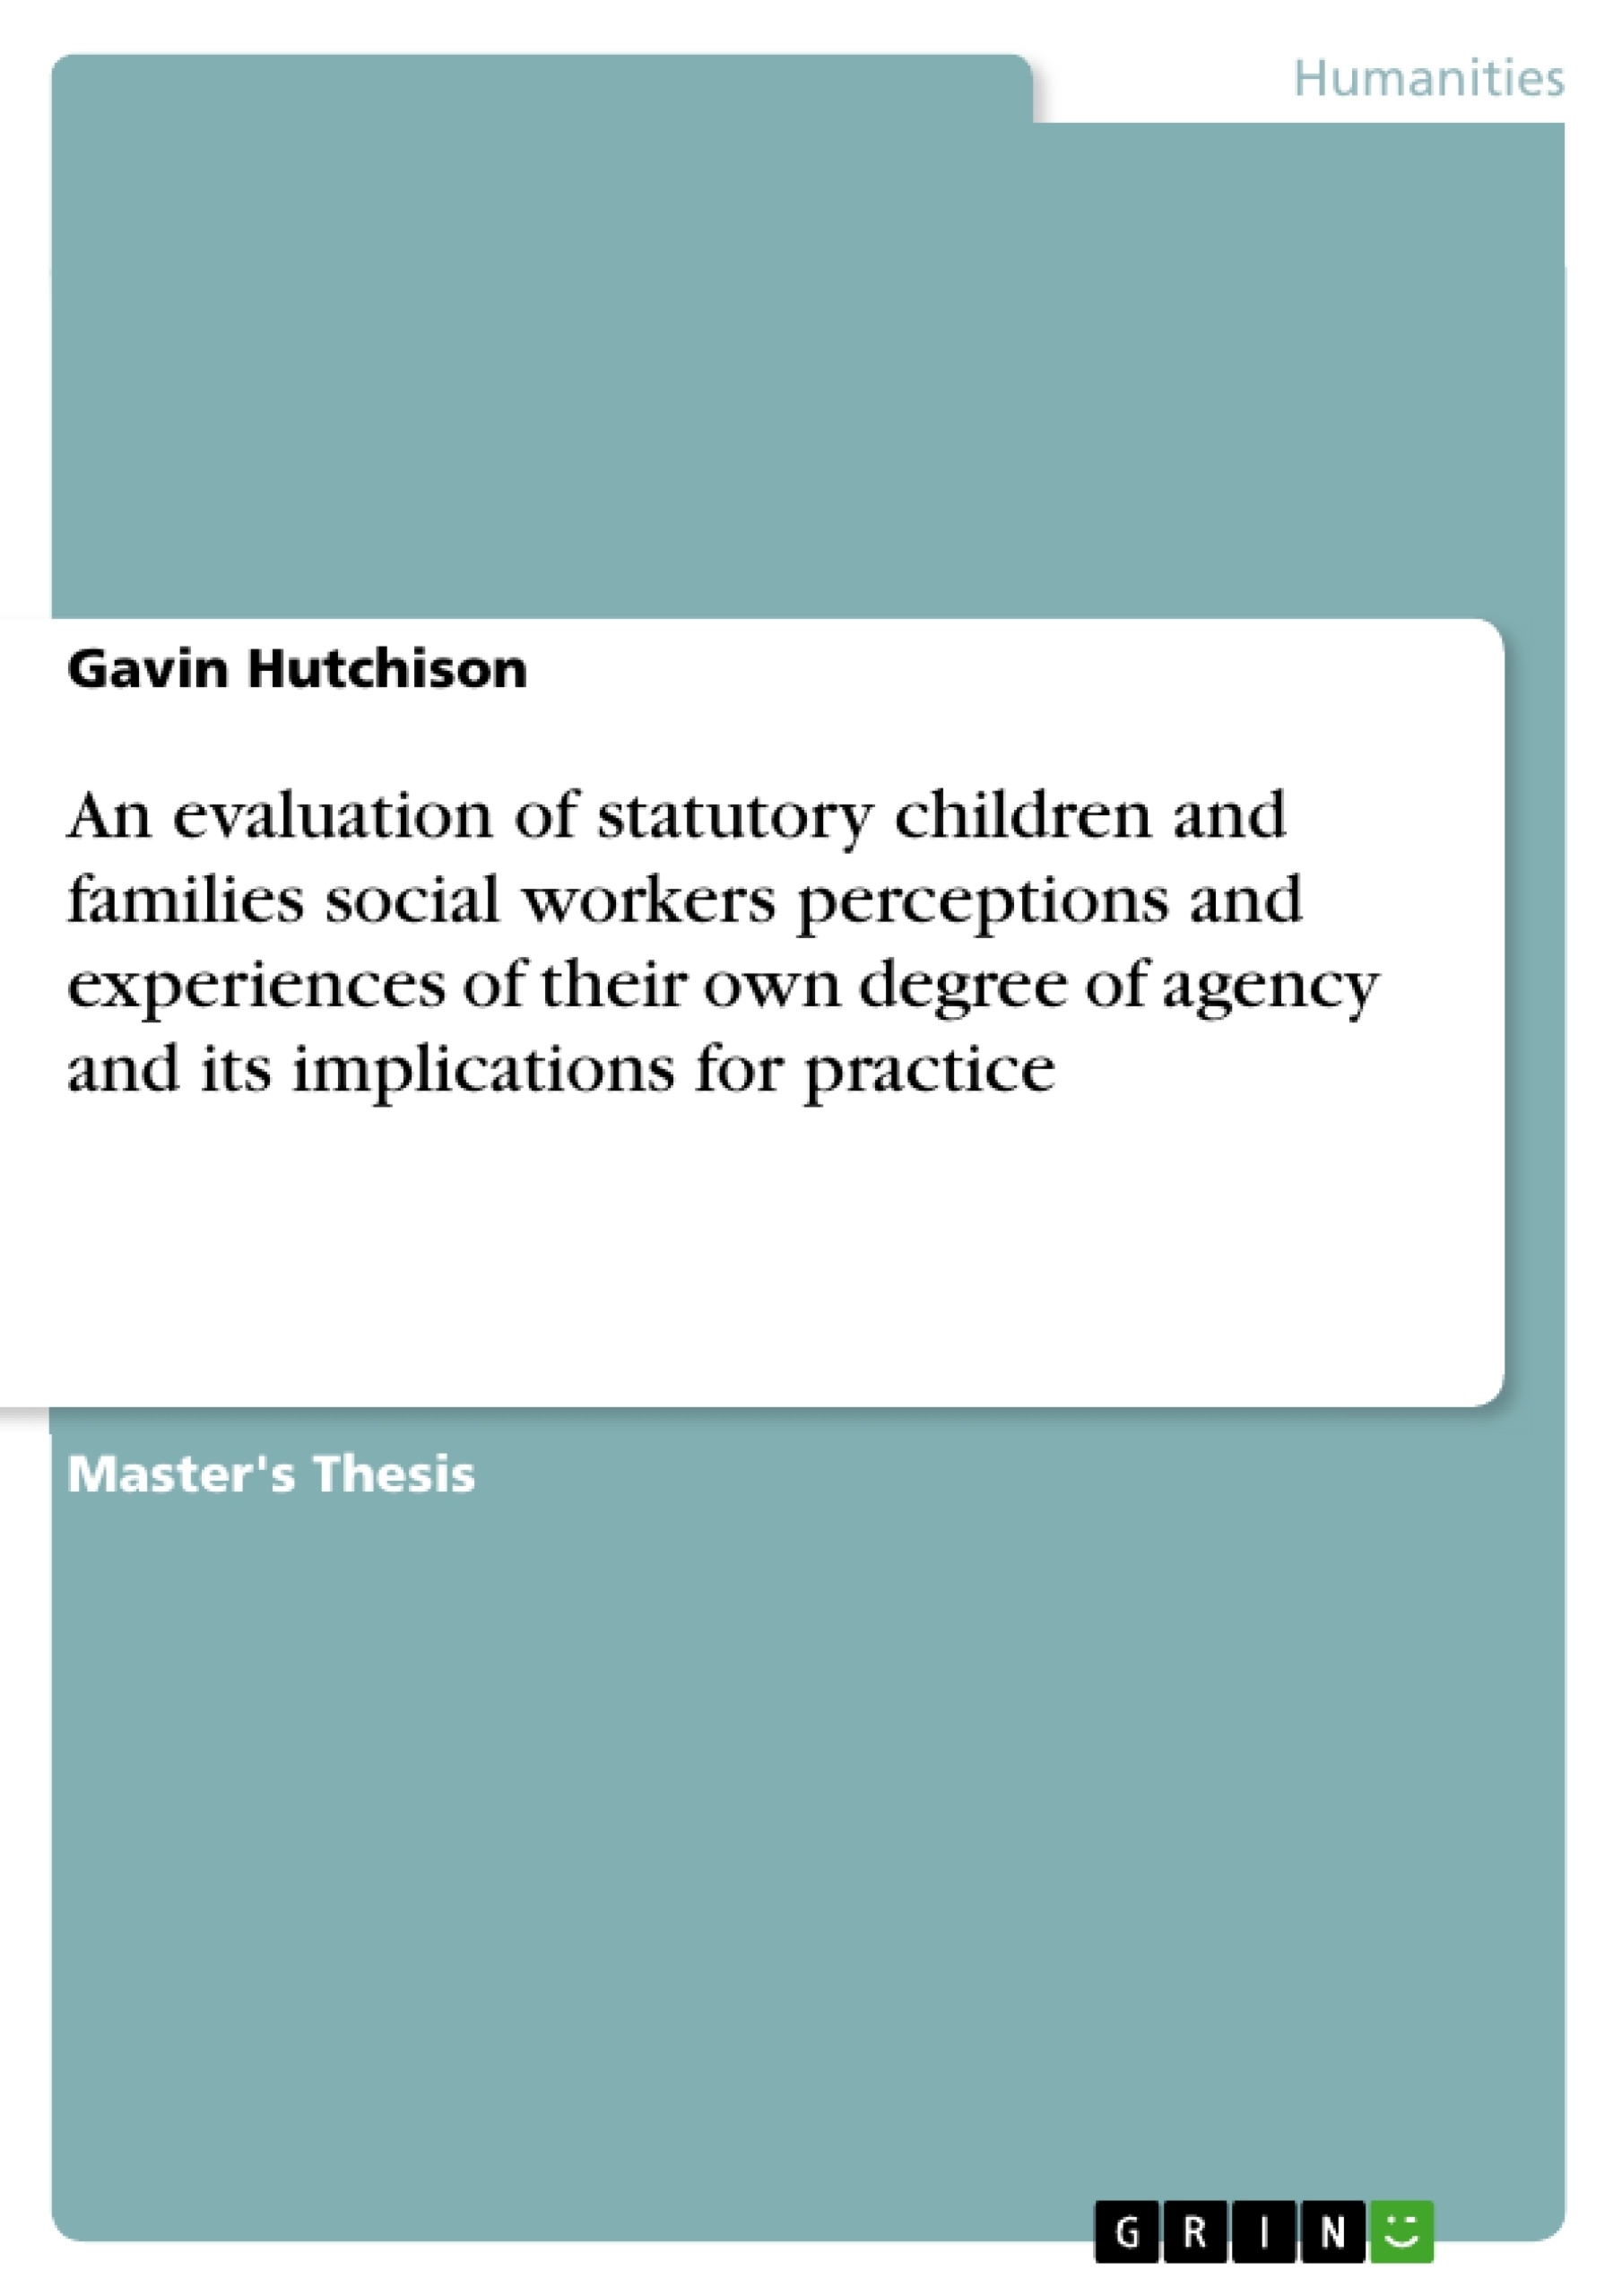 Titel: An evaluation of statutory children and families social workers perceptions and experiences of their own degree of agency and its implications for practice